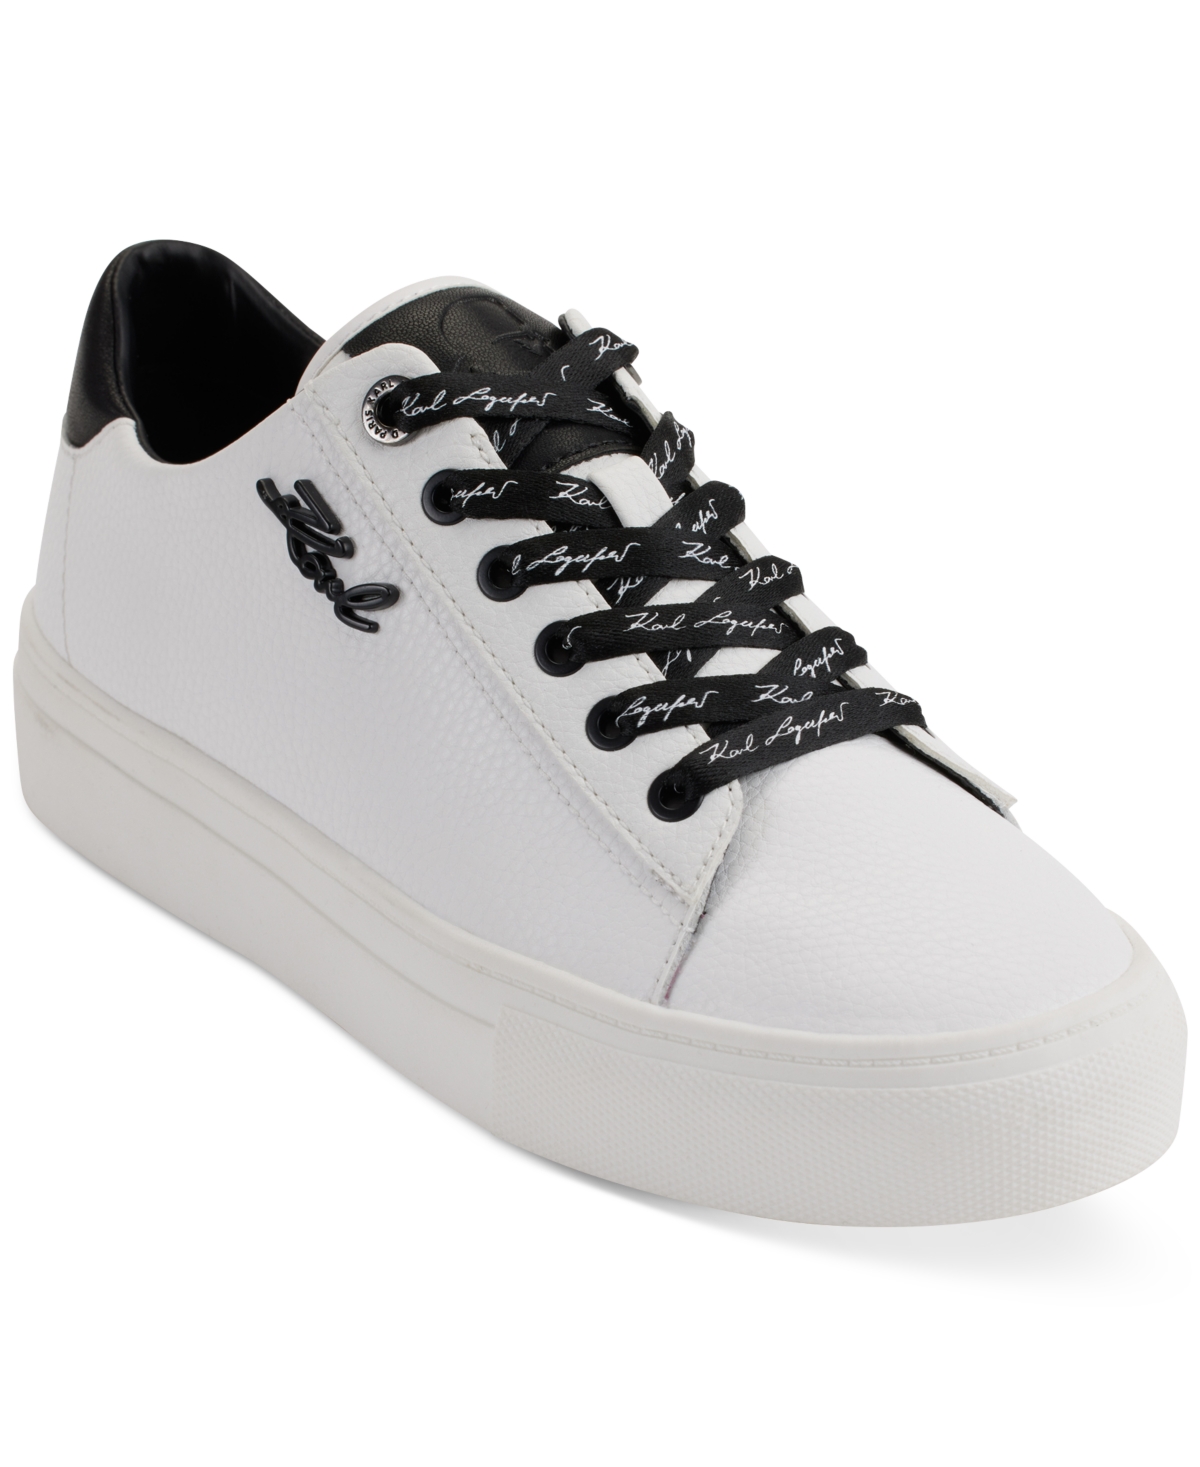 Women's Carson Lace-Up Sneakers - Bright White/ Black